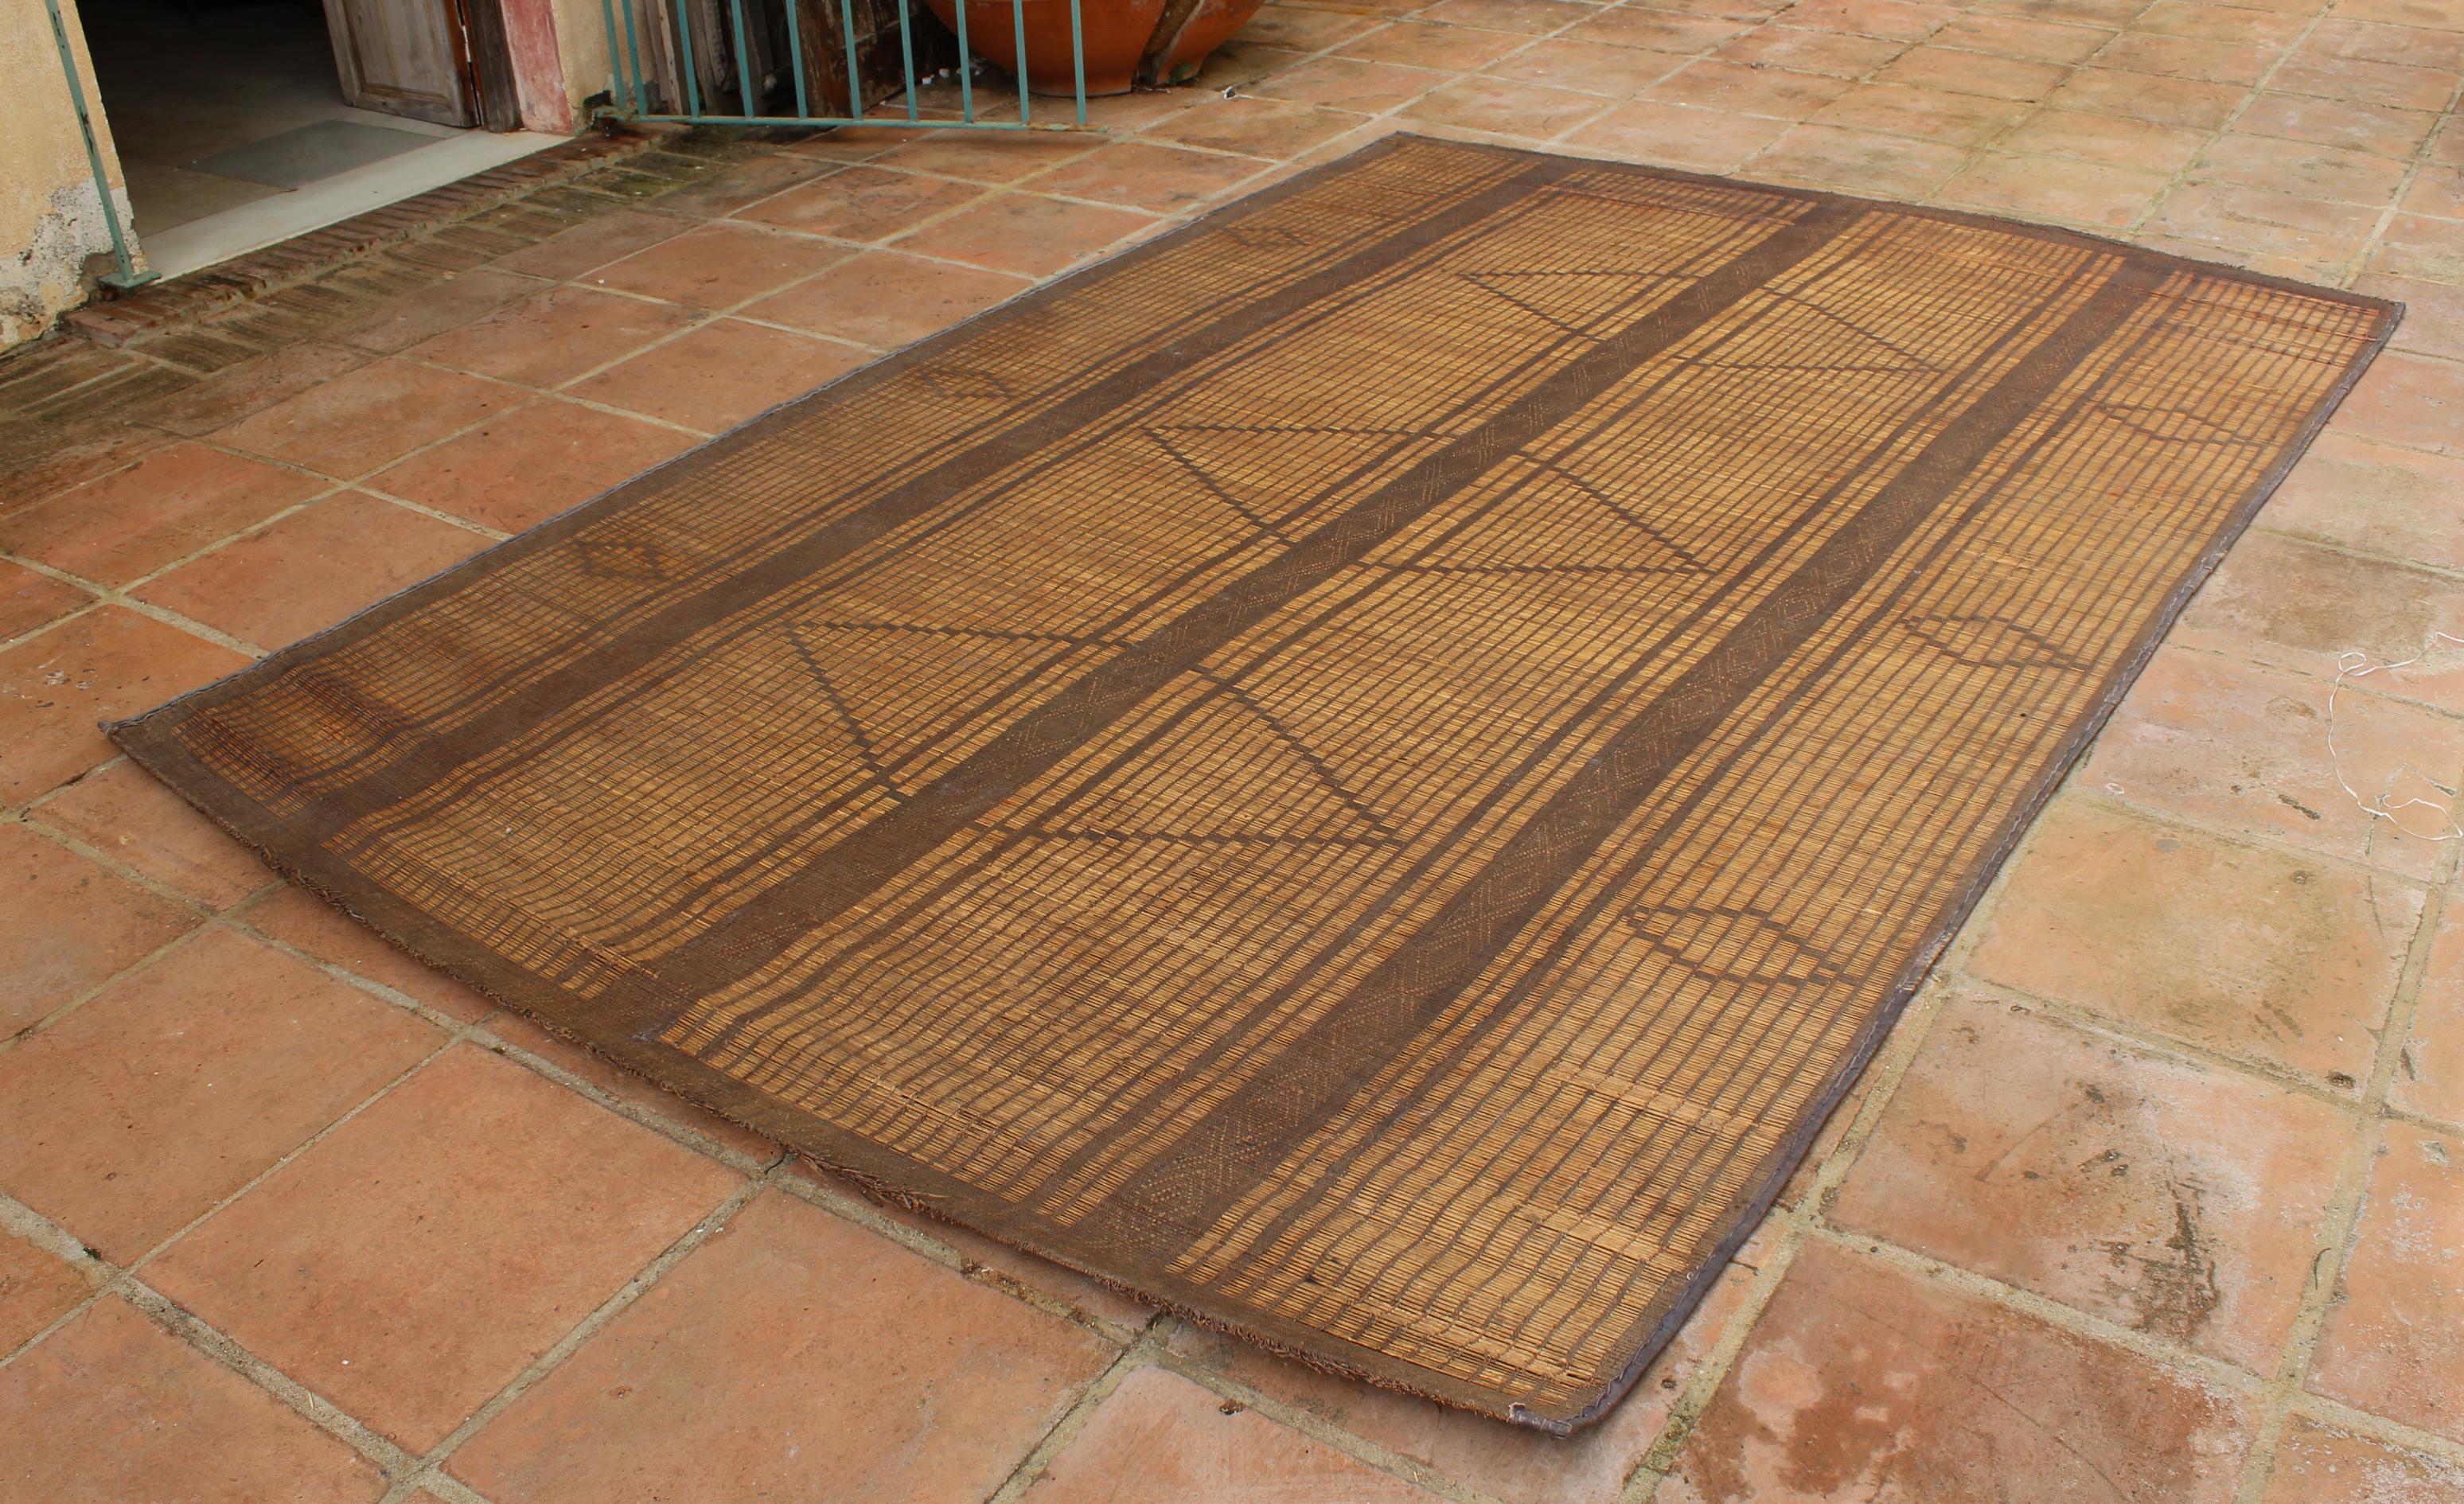 Moroccan Tuareg leather mats are made of dwarf palm tree fibers and hand woven with leather stripes, this are great to use indoor or outdoor, beautiful brown earth-tone colors. This vintage midcentury carpets are made in the desert of Morocco near